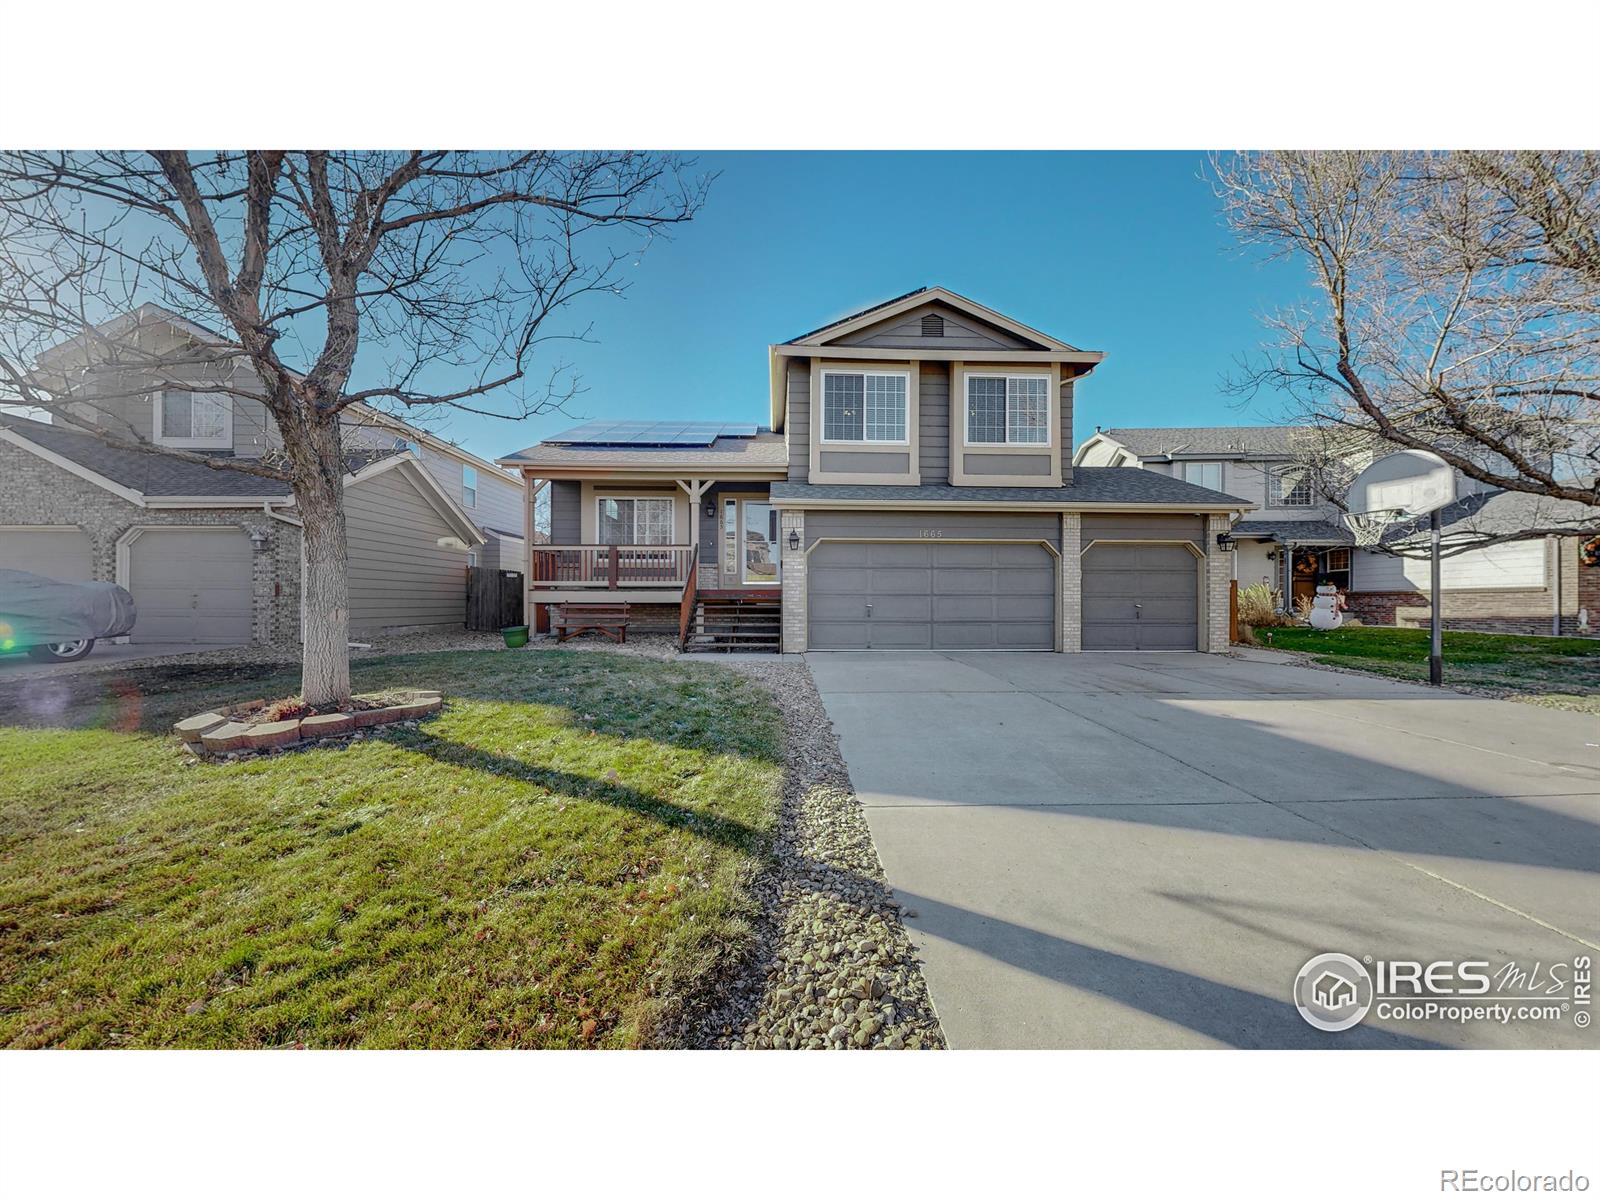 1665 e 135th avenue, Thornton sold home. Closed on 2024-02-23 for $625,000.